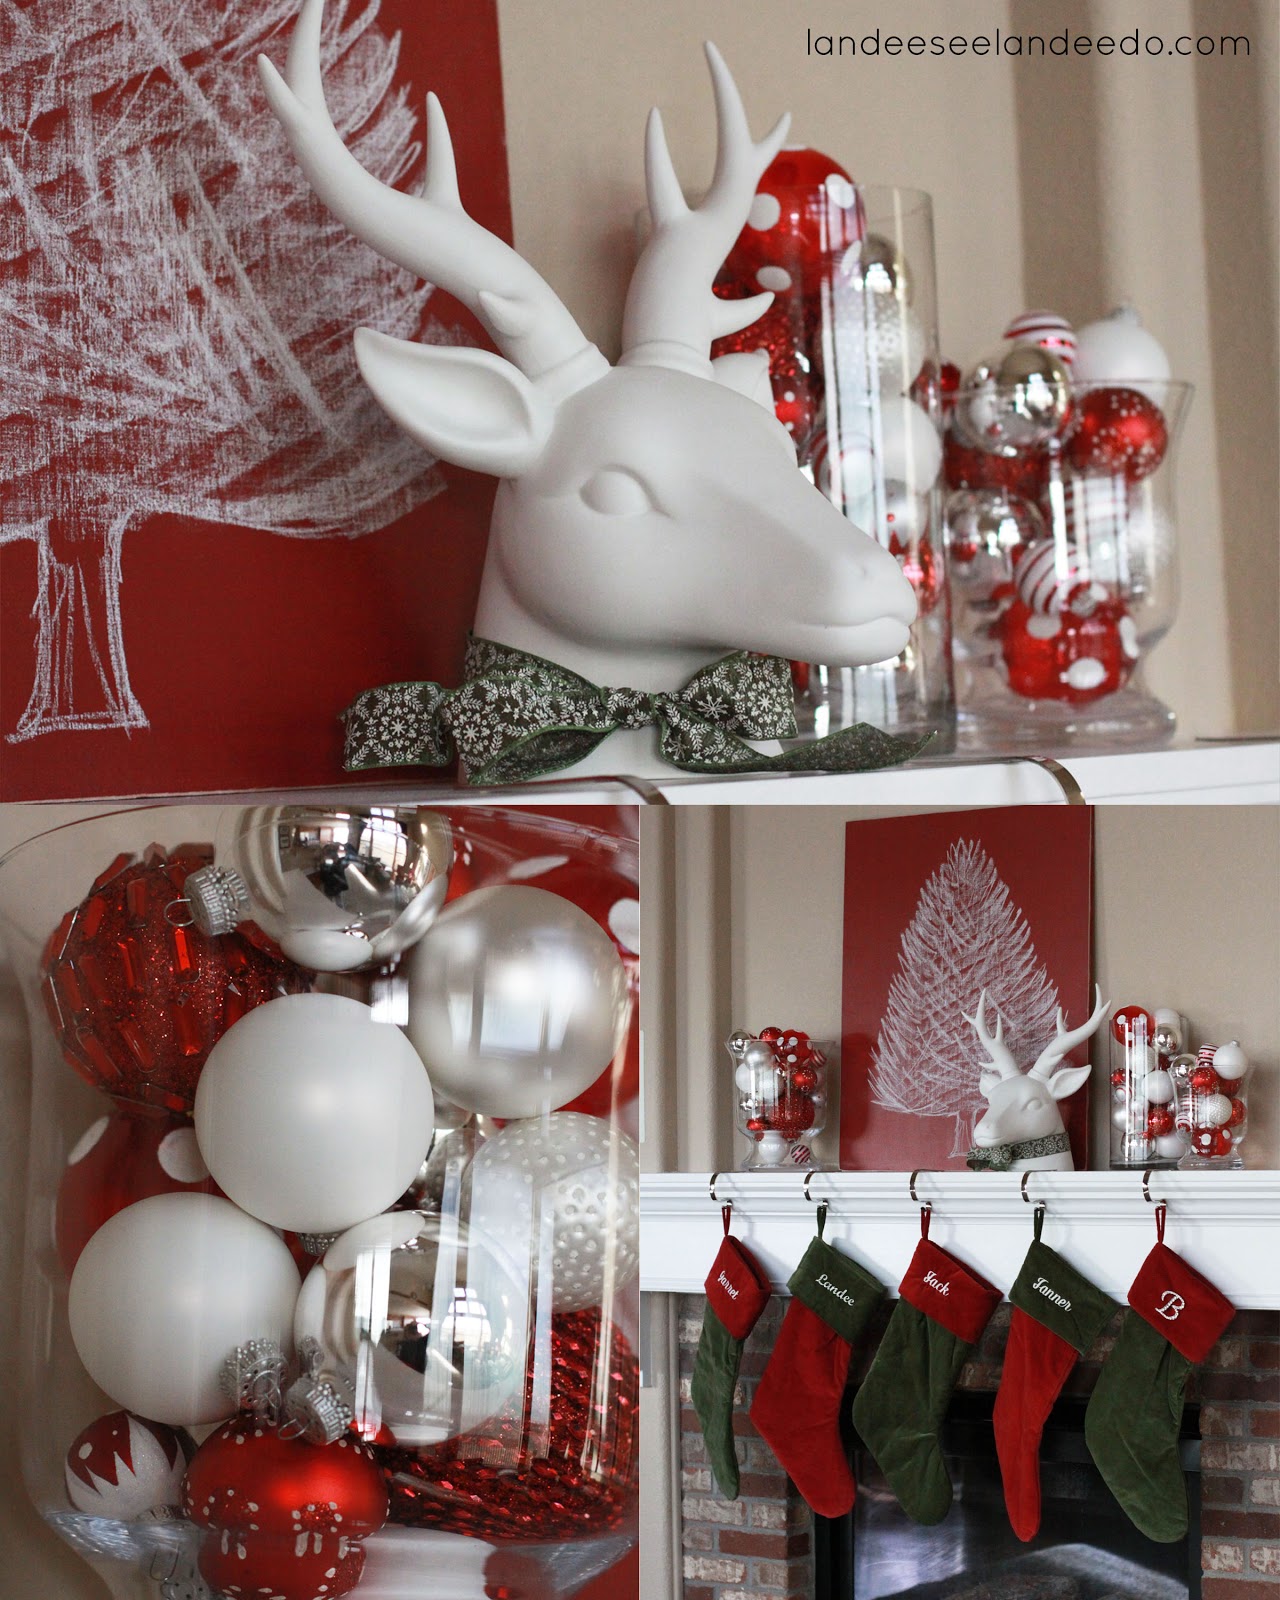 interior-design-ideas-awesome-country-christmas-home-decoration-for-mantel-with-white-silver-and-red-baubles-and-red-green-christmas-stocking-awesome-country-christmas-home-decor